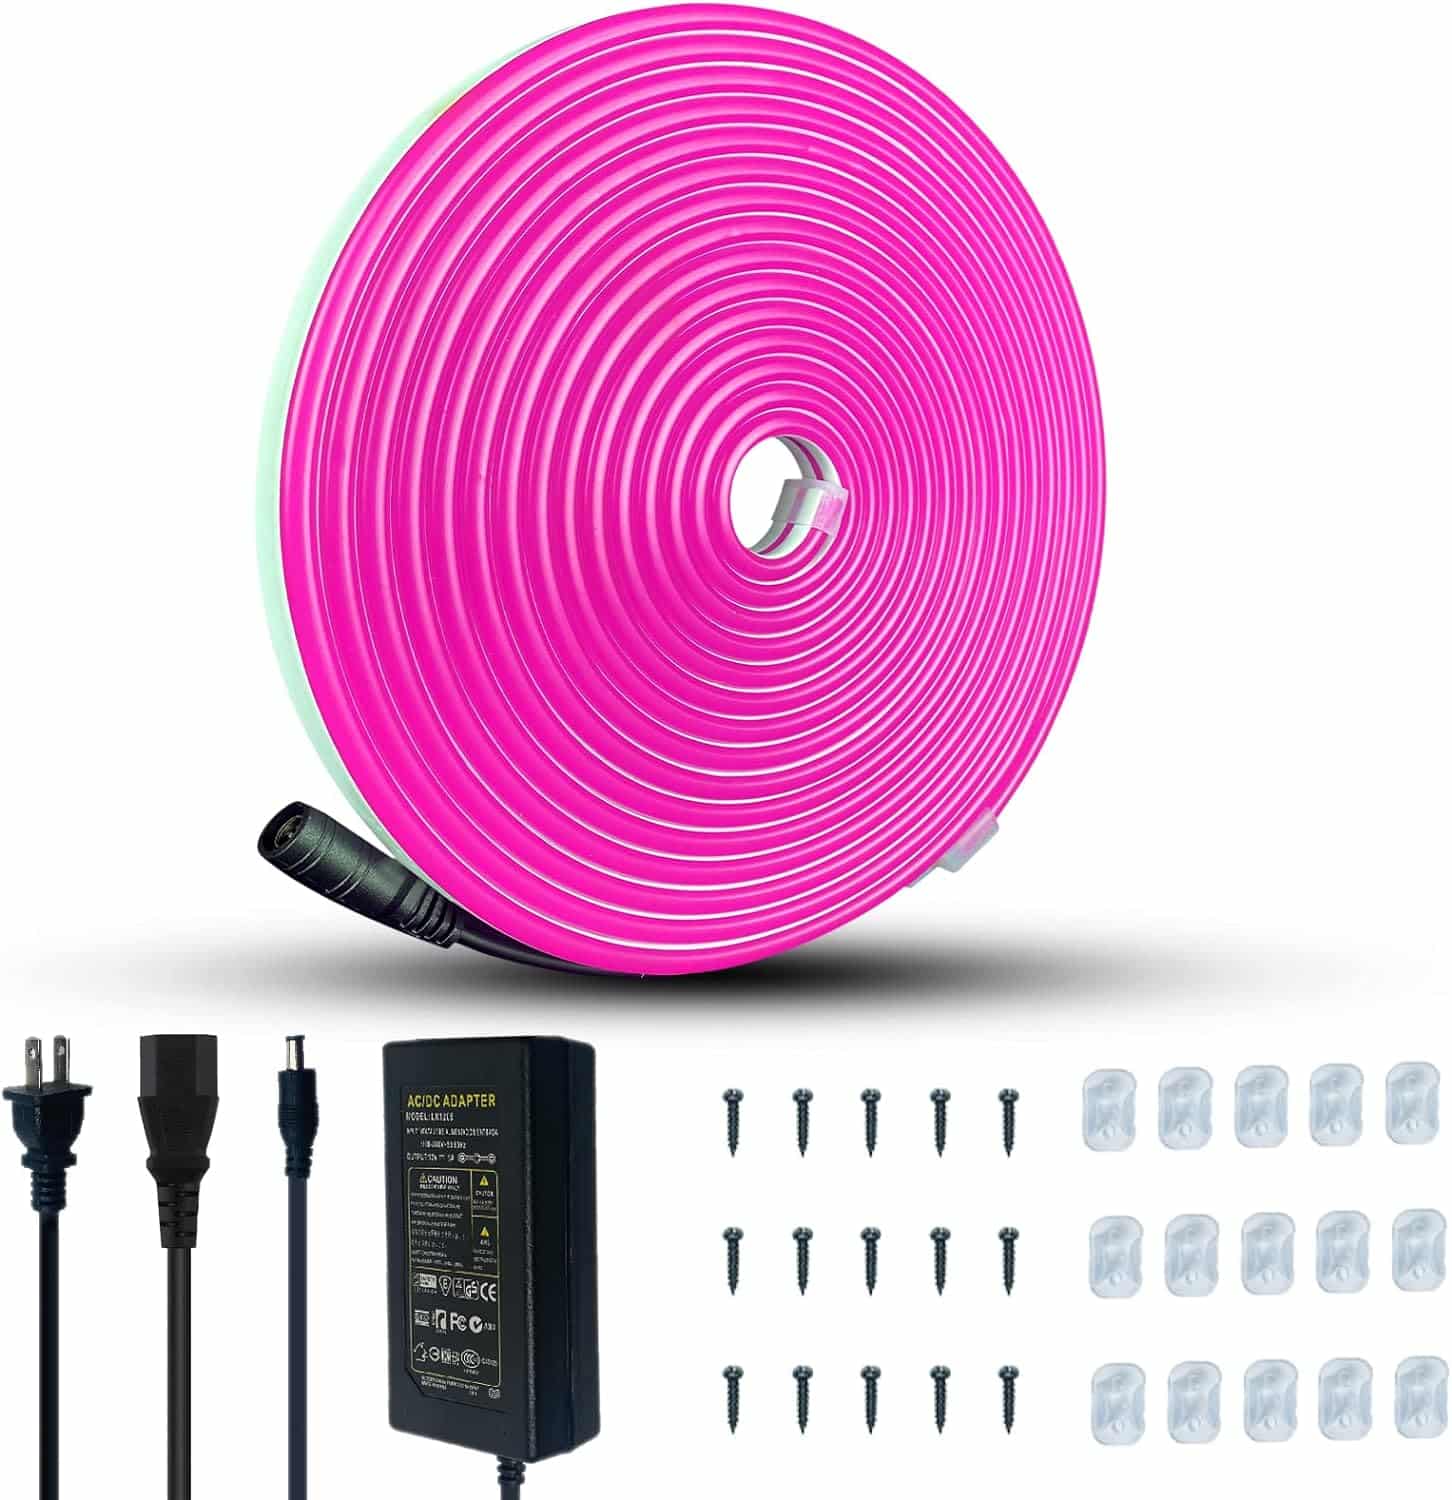 JO.KO LED Silicone Neon Light Strip, Neon Rope Light 12v 16.4 Ft/5m Waterproof DIY Cuttable Outdoor Neon Lights (Power Adapter Included)(Pink)